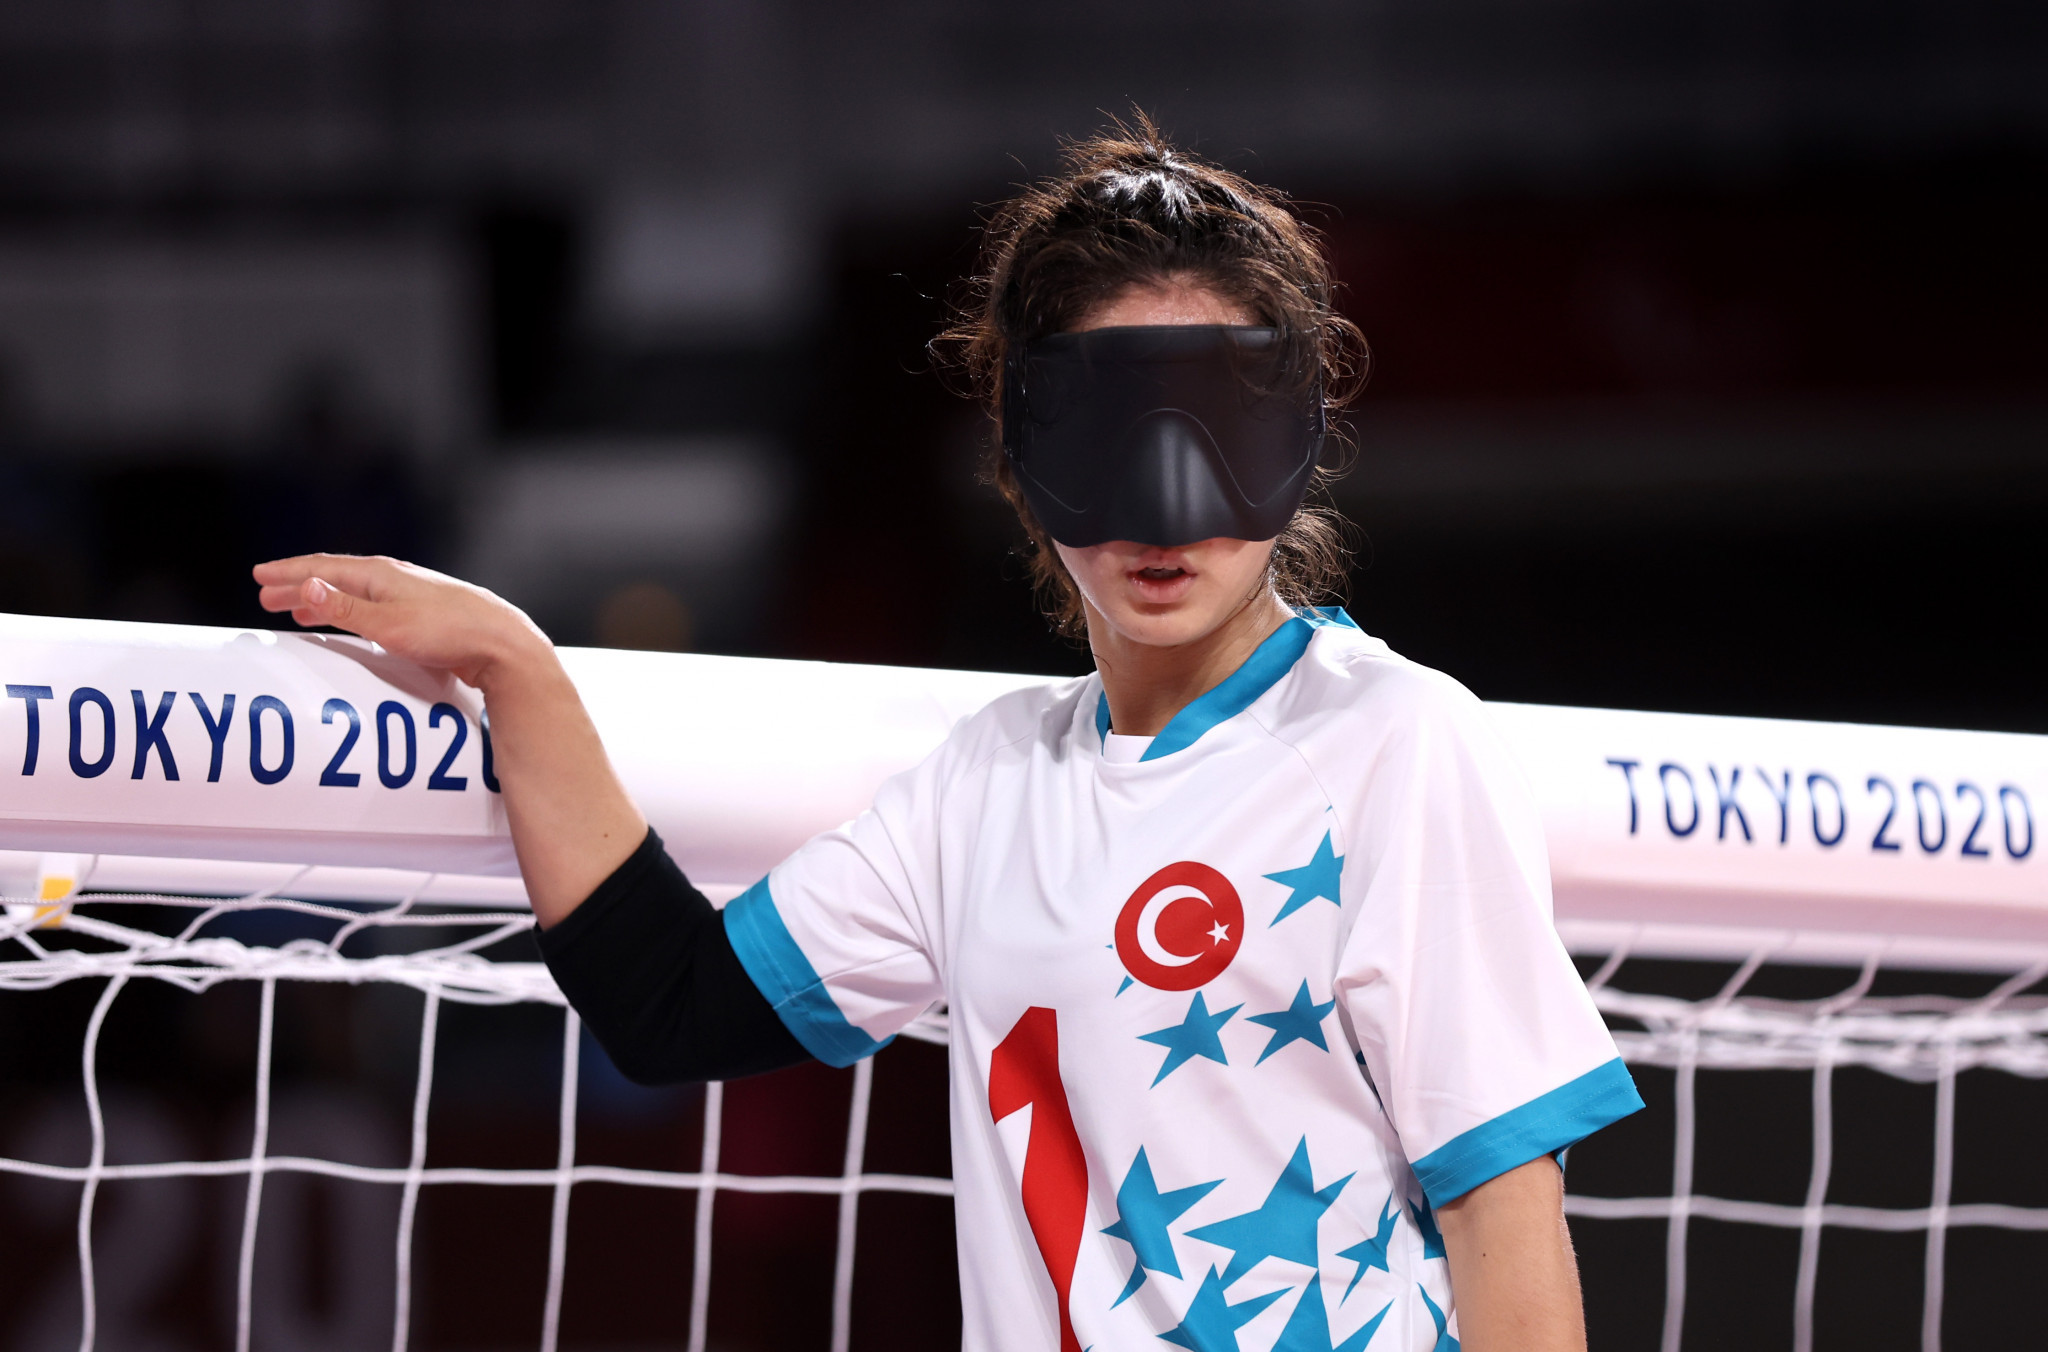 Turkey are the Paralympic goalball champions for the women's competition ©Getty Images